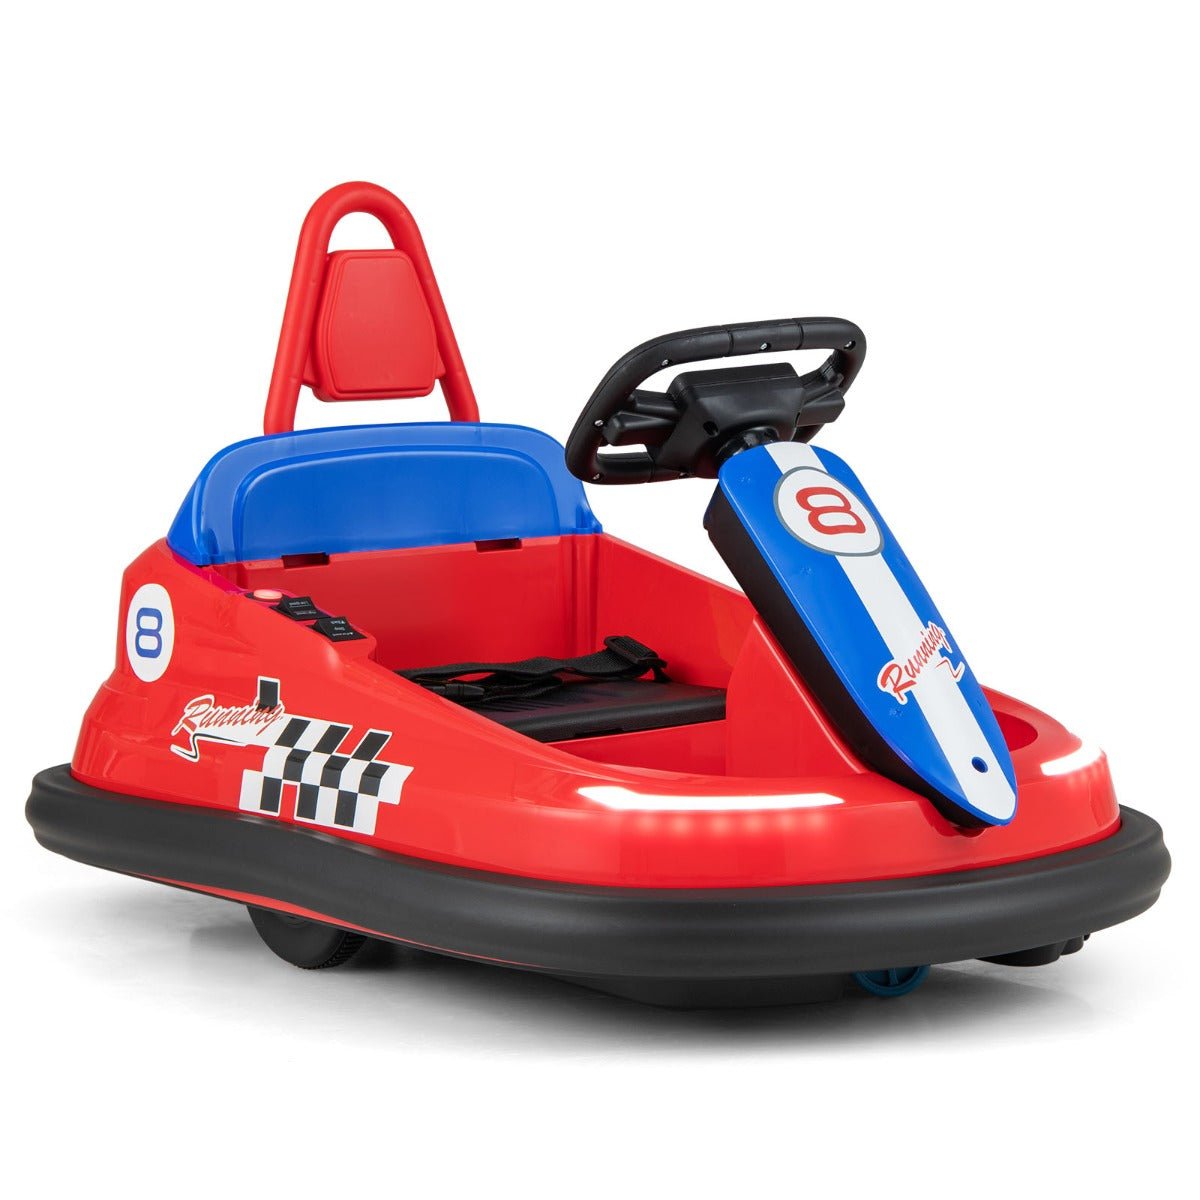 Kids' Red Ride-On Car with 360° Spinning Action